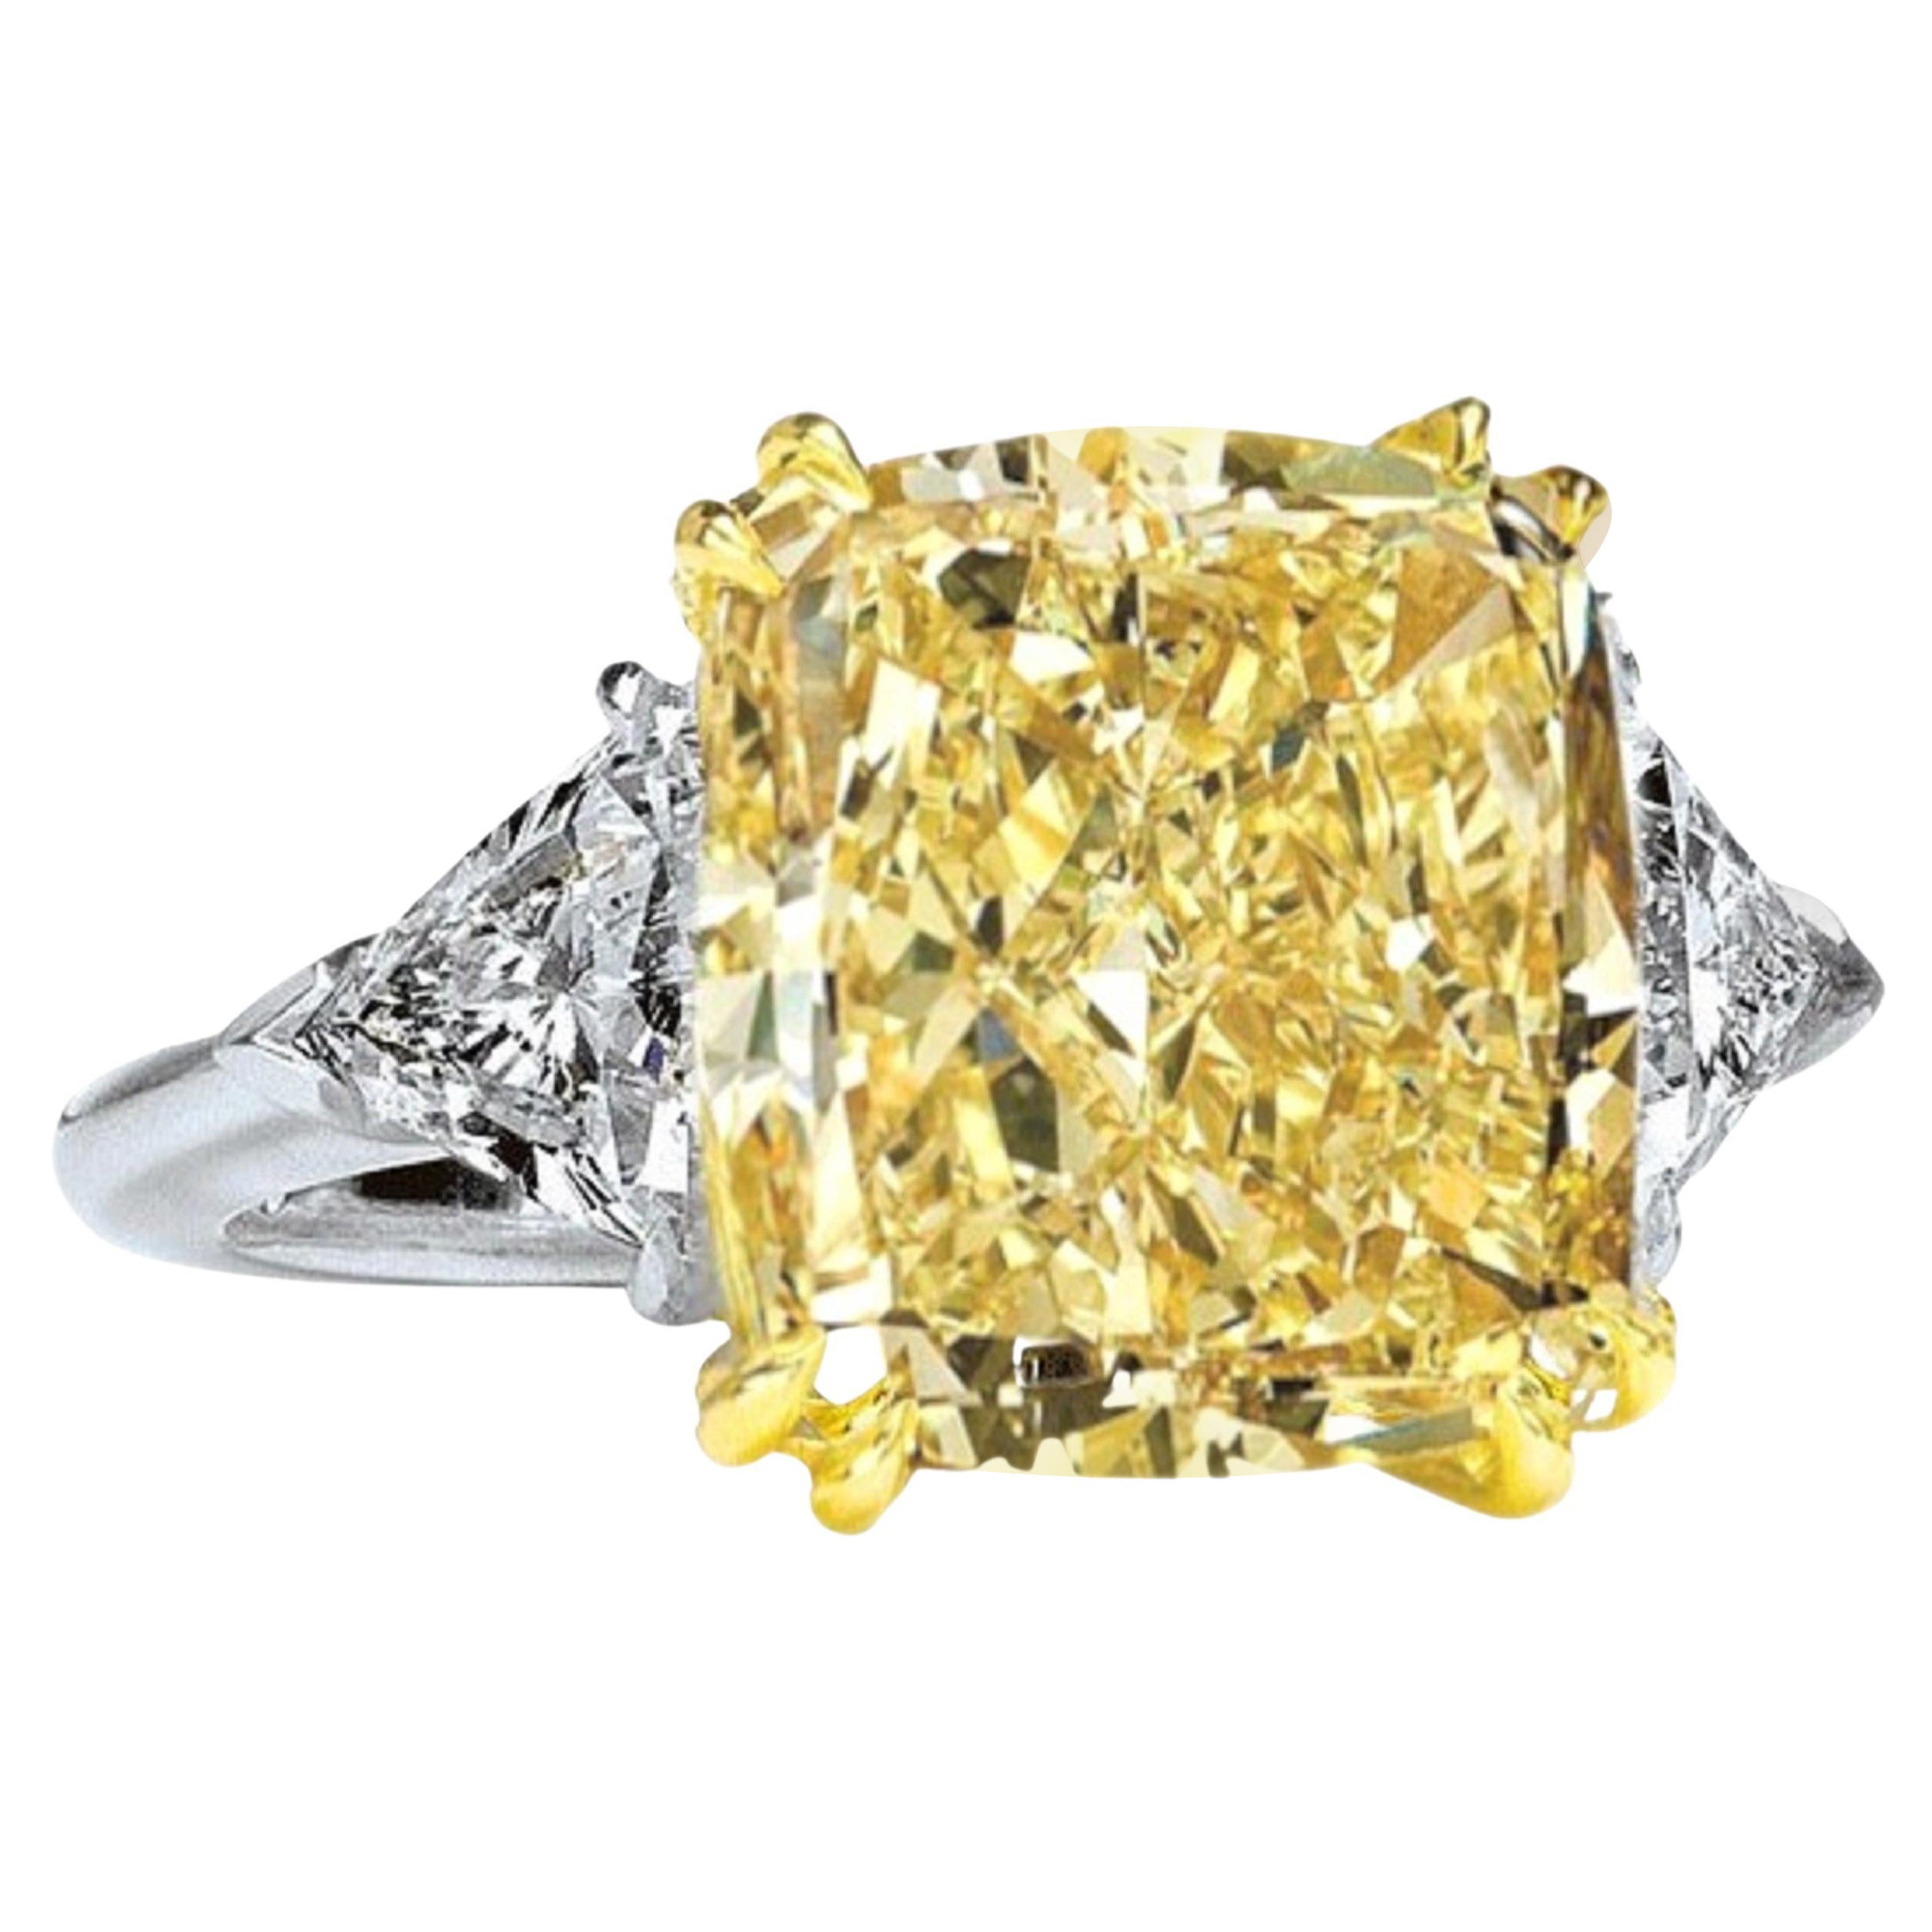 Exceptional GIA Certified 4.10 Carat Fancy Yellow Diamond Ring FLAWLESS Clarity For Sale